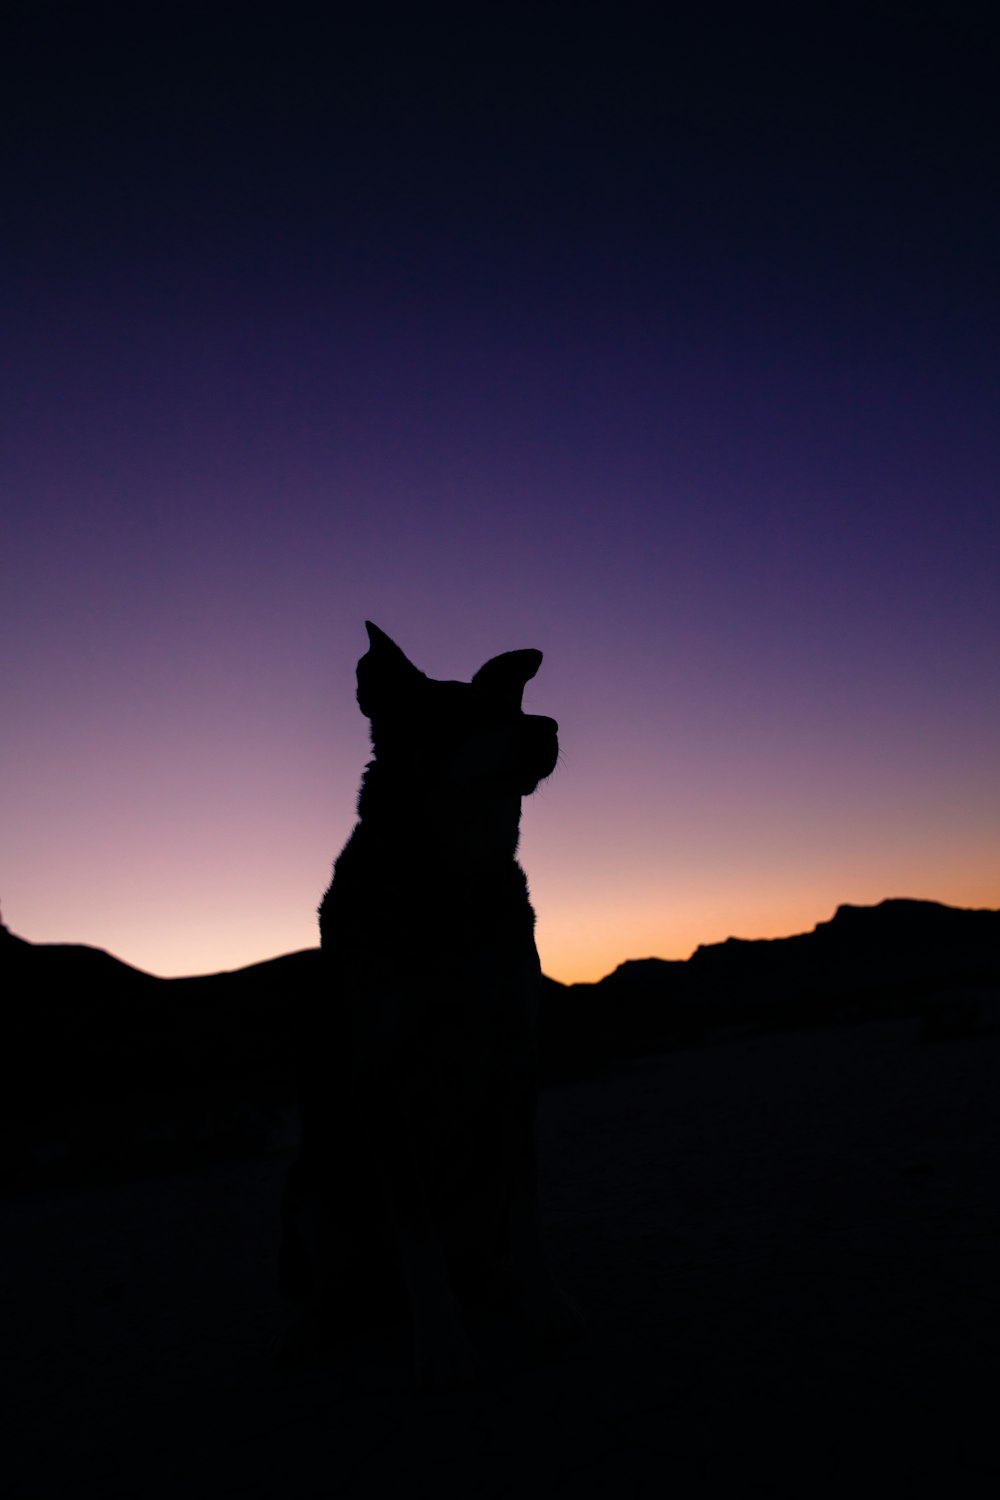 Dog Silhouette Pictures | Download Free Images on Unsplash